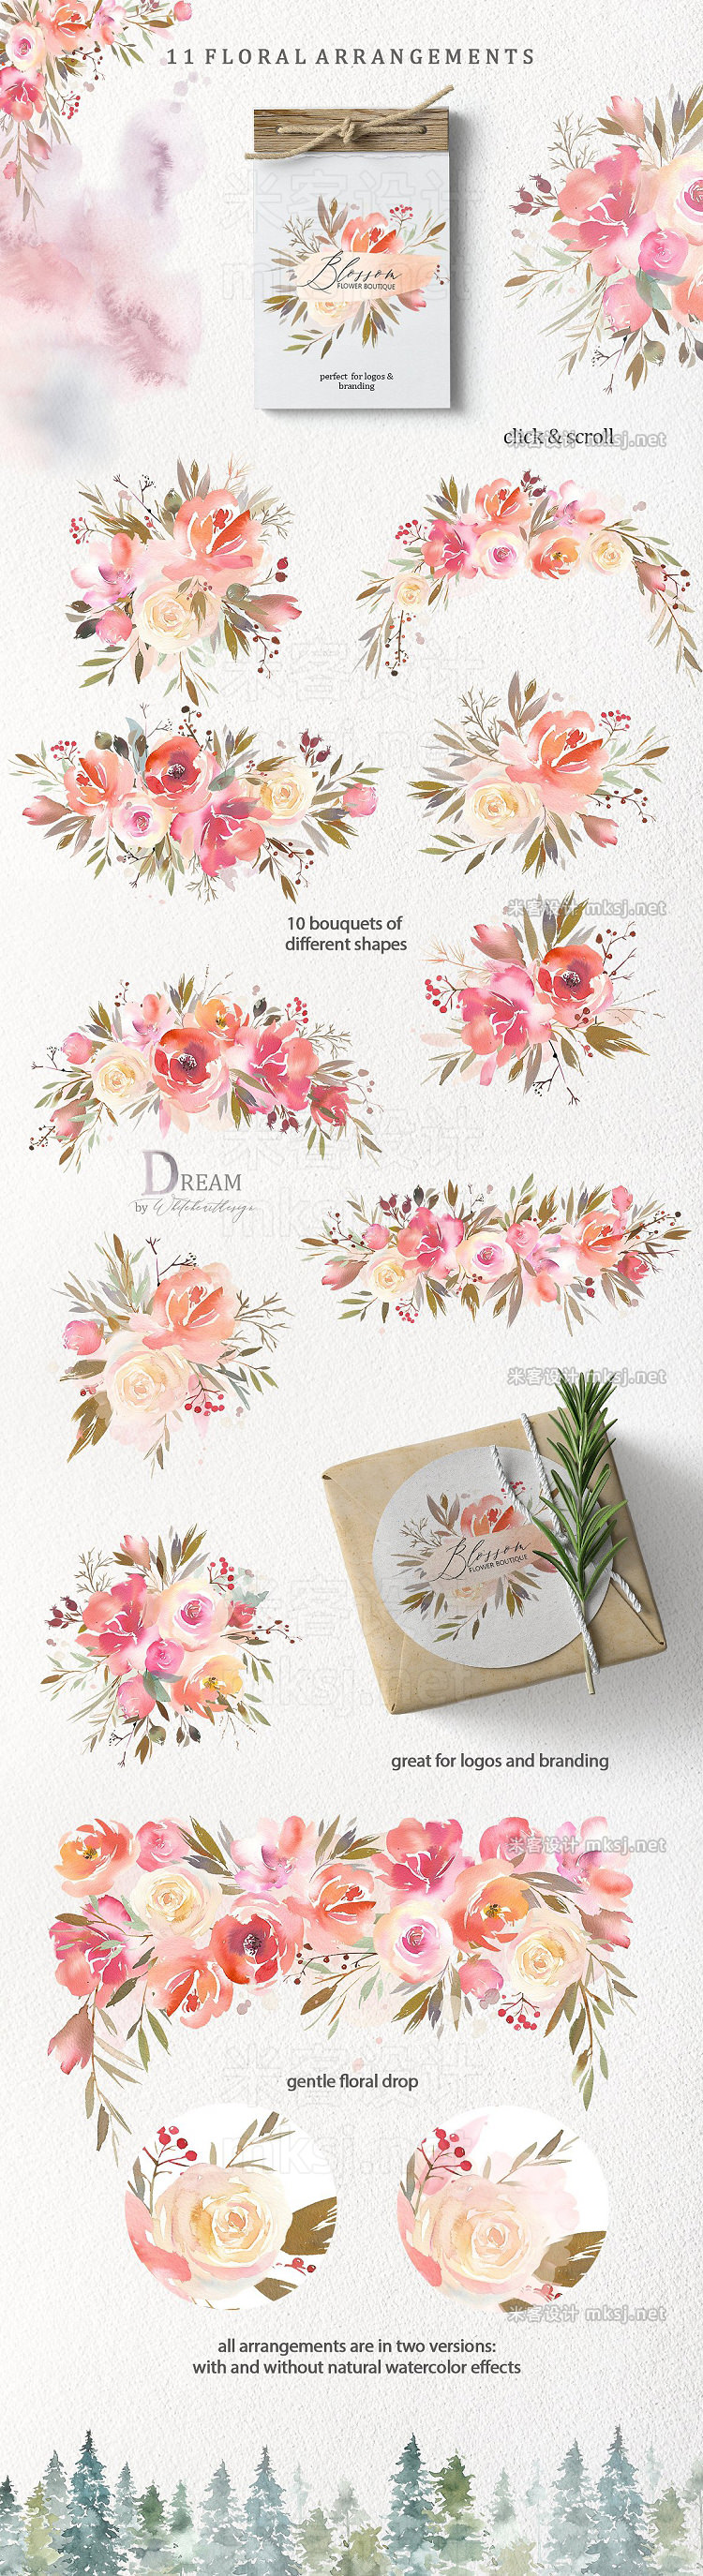 png素材 Dream - Fairy Watercolor Collection